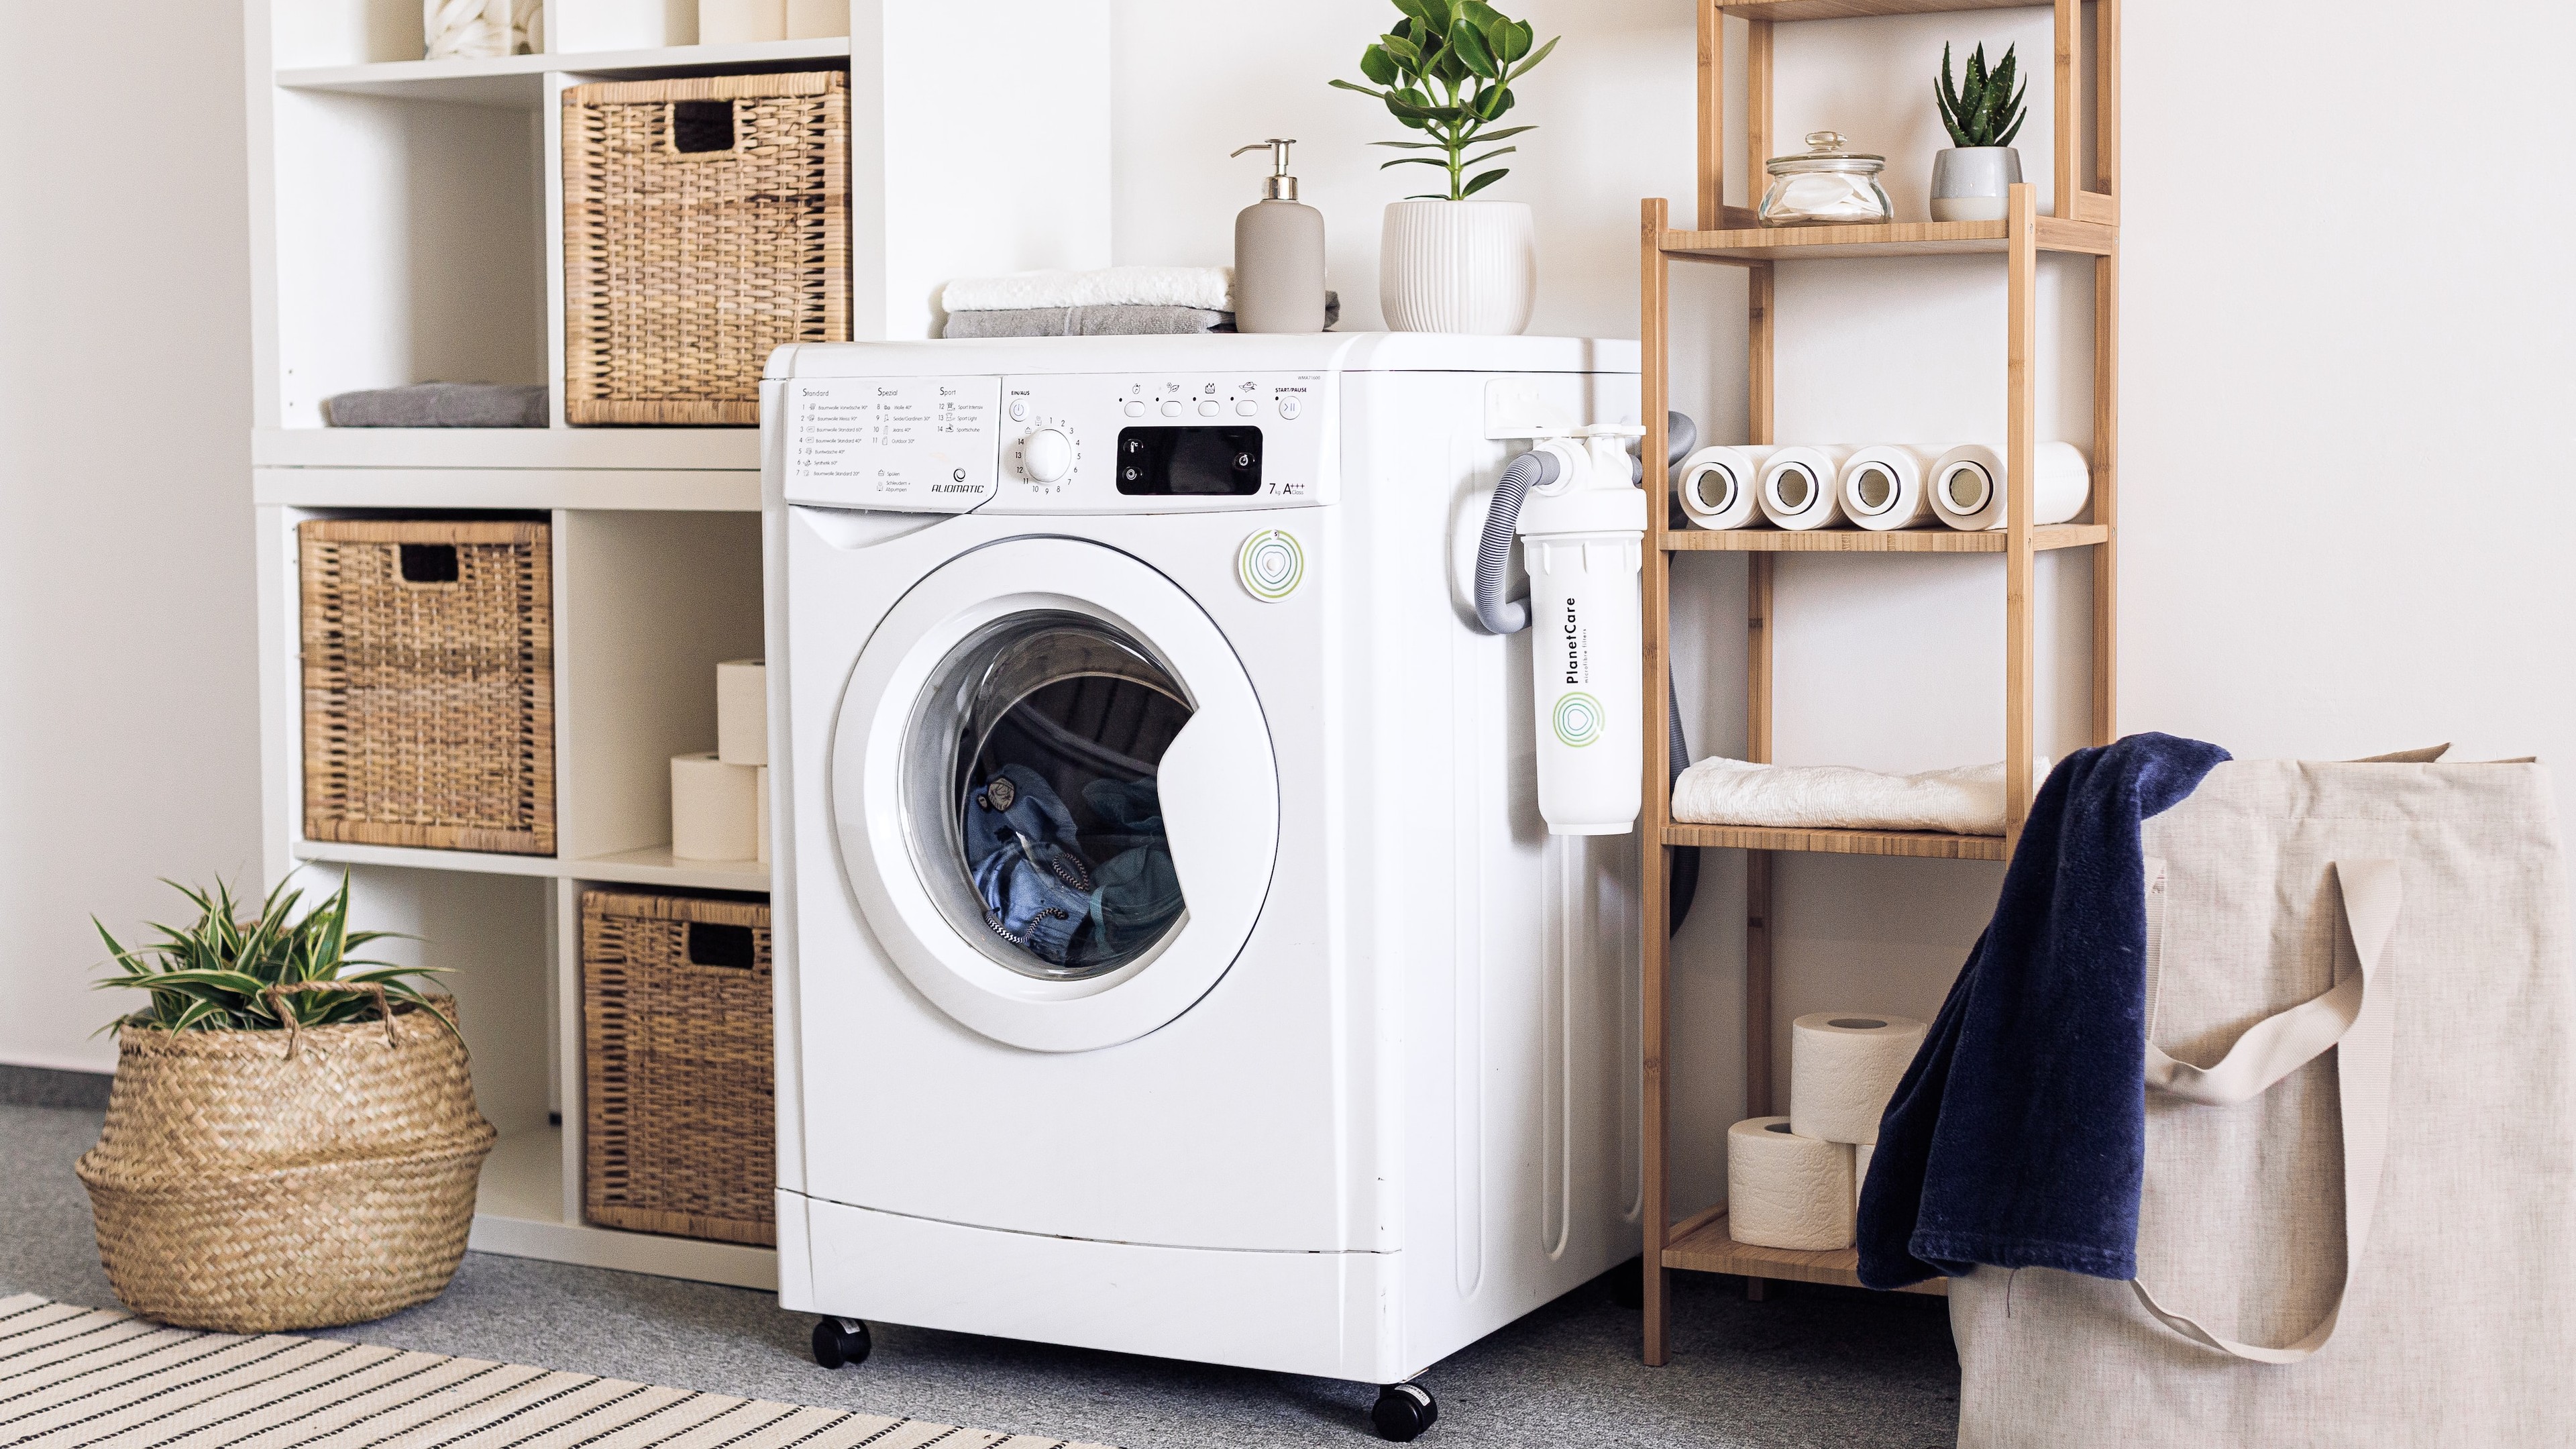 Accessories to Enhance Your Laundry Day Experience